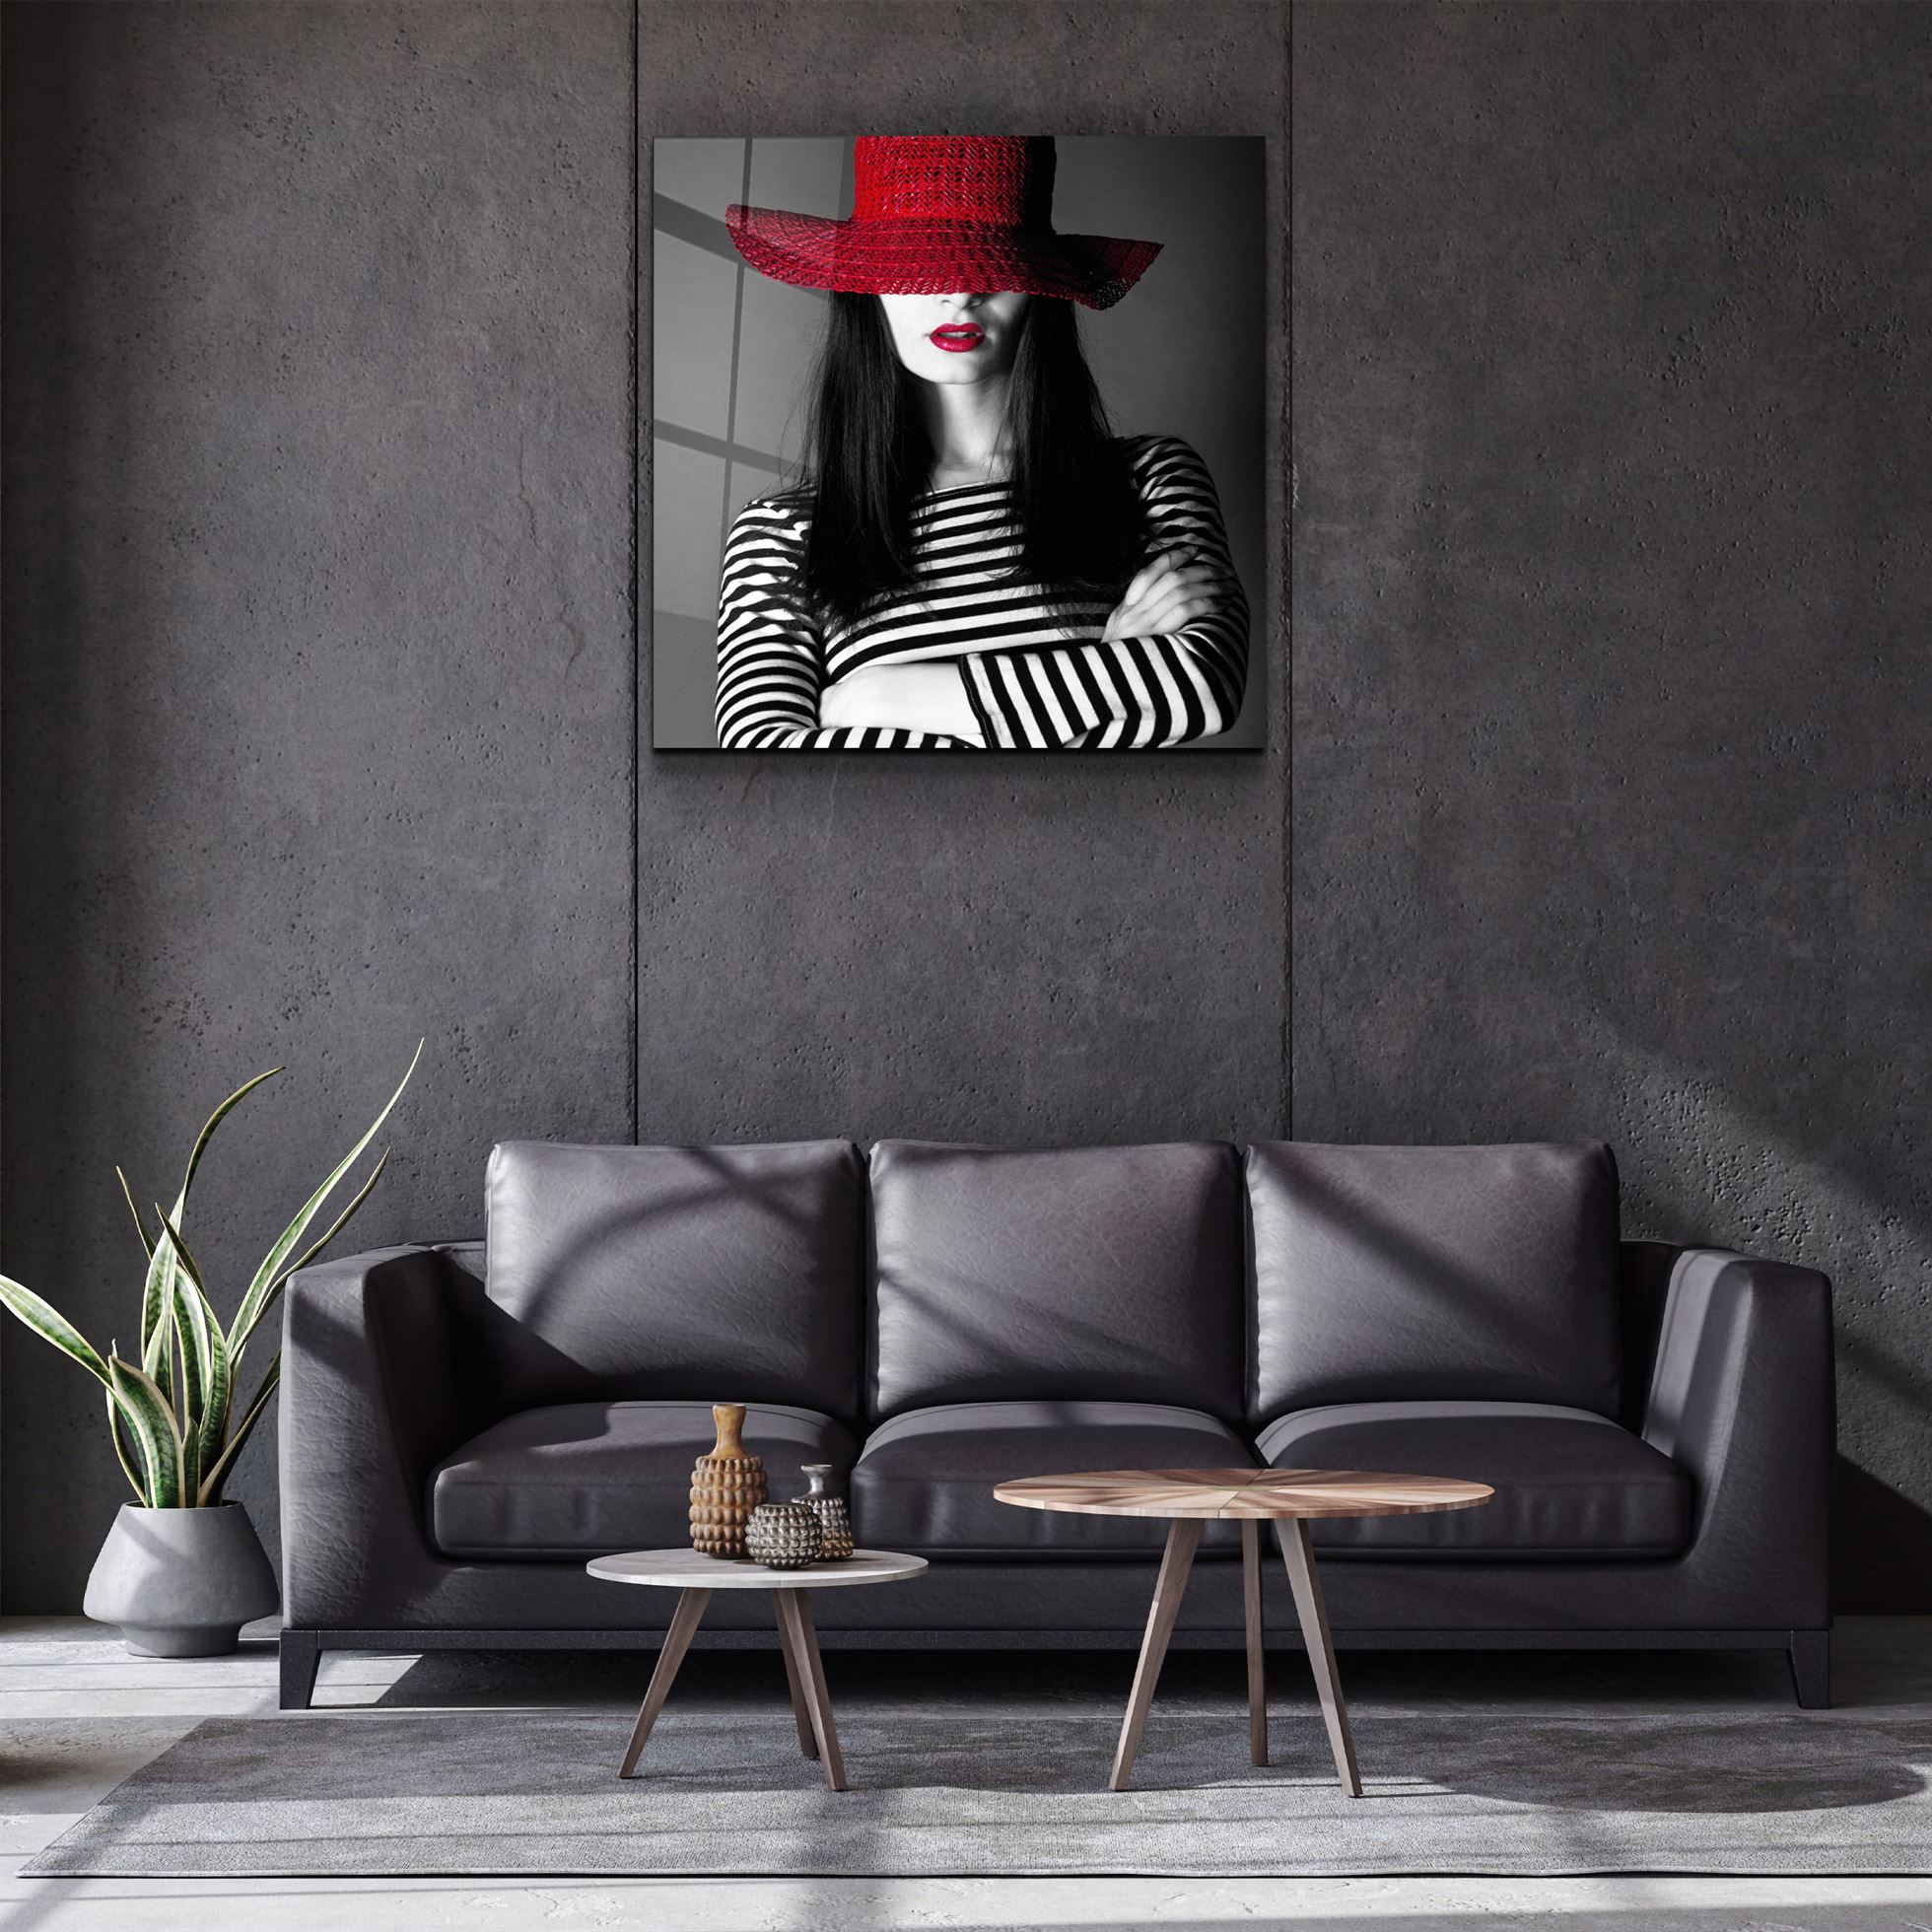 ・"Woman in Red Hat"・Glass Wall Art